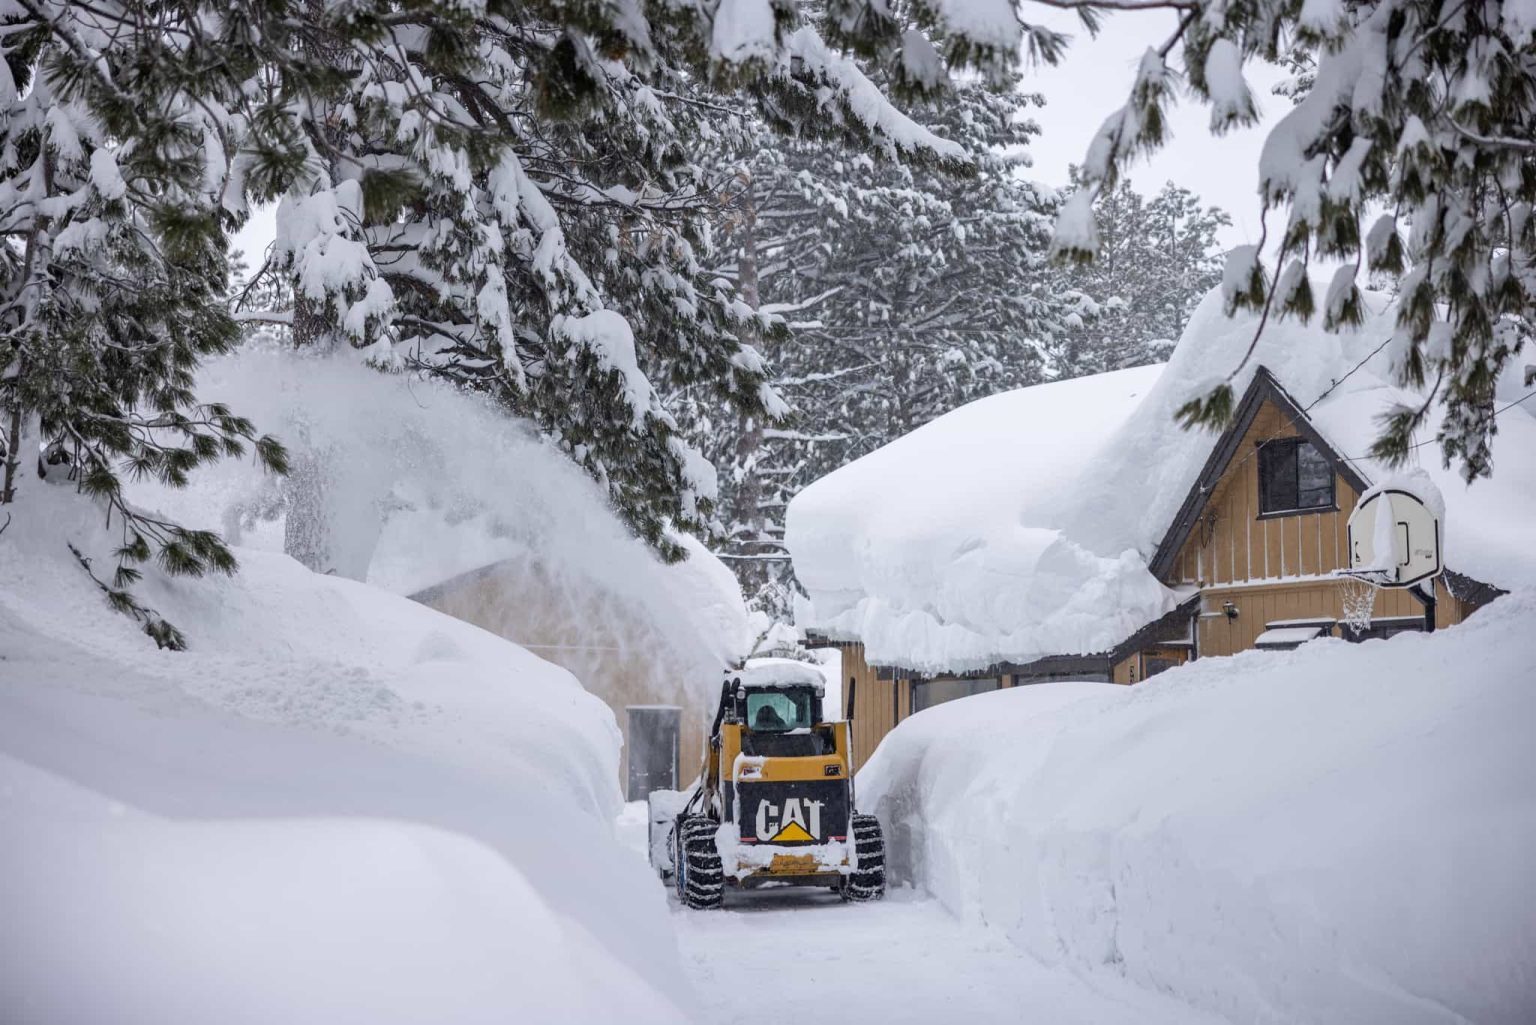 Mammoth Mountain, CA, has the most recorded snowfall out of any ski area on Earth right now.